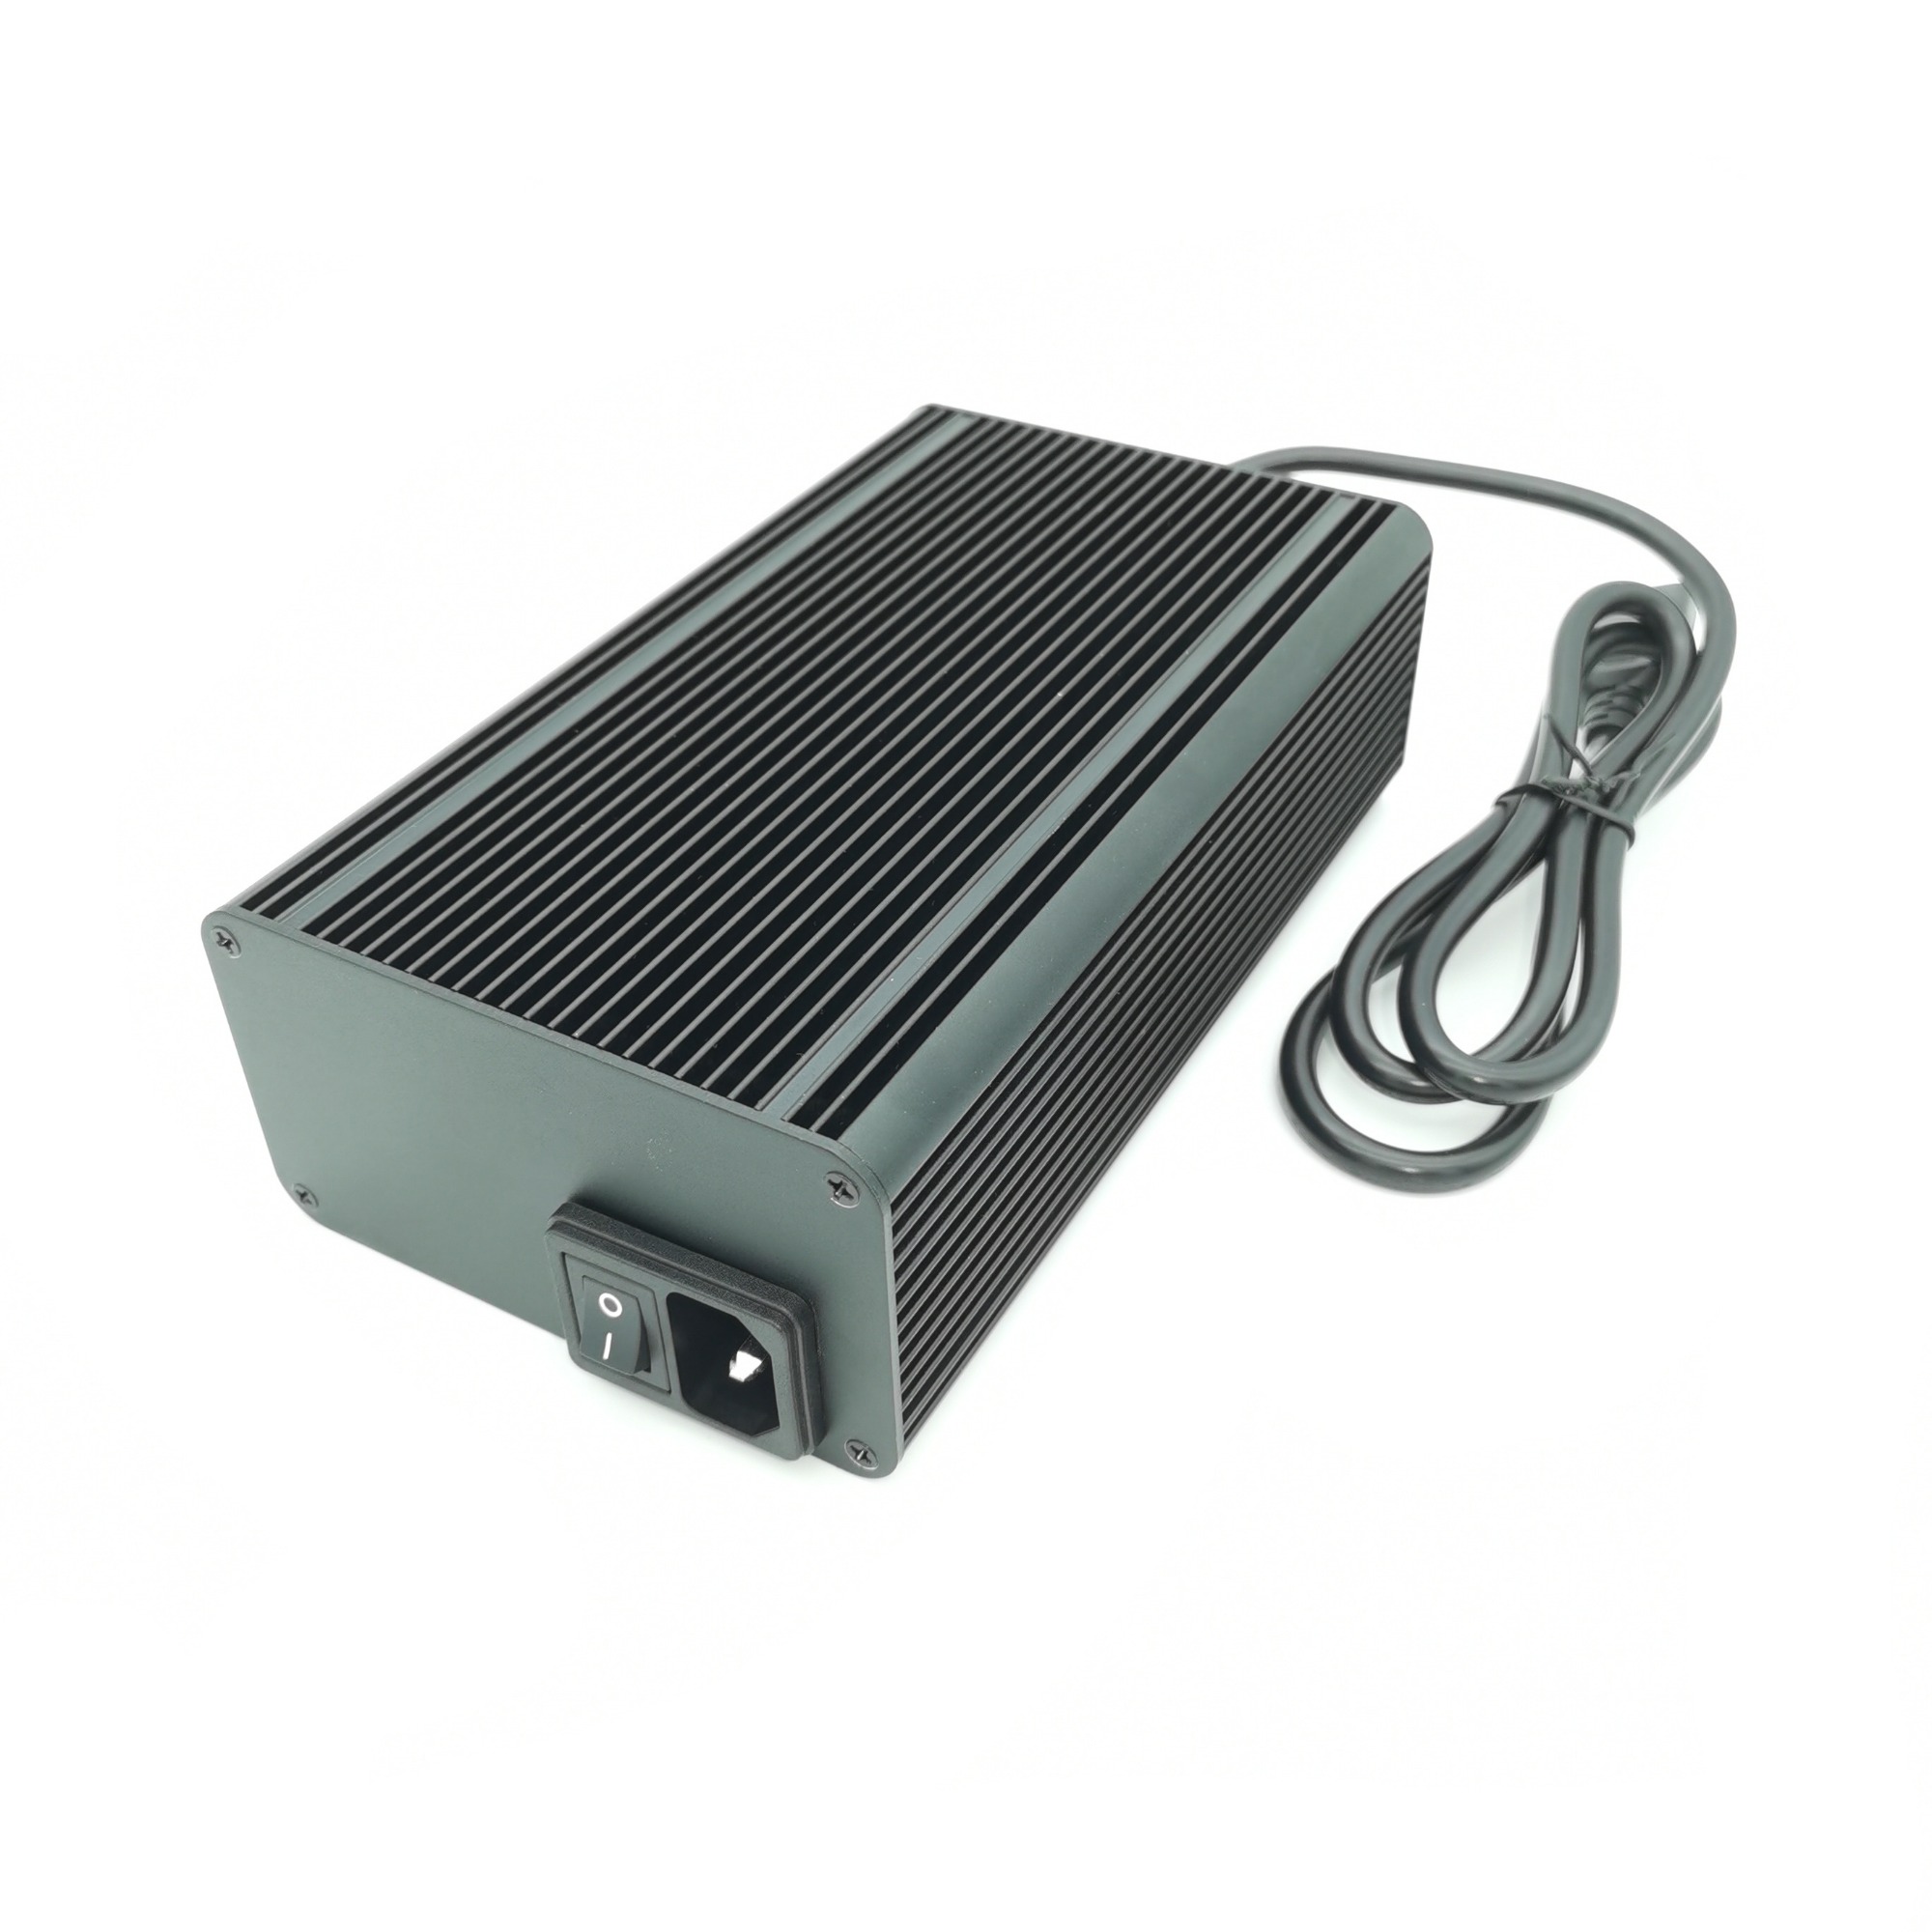 Smart Dustproof design 50.4V 5A Lithium battery charger For 48V 12S Li-ion Battery charger Electric Scooter E-bike motorcycle